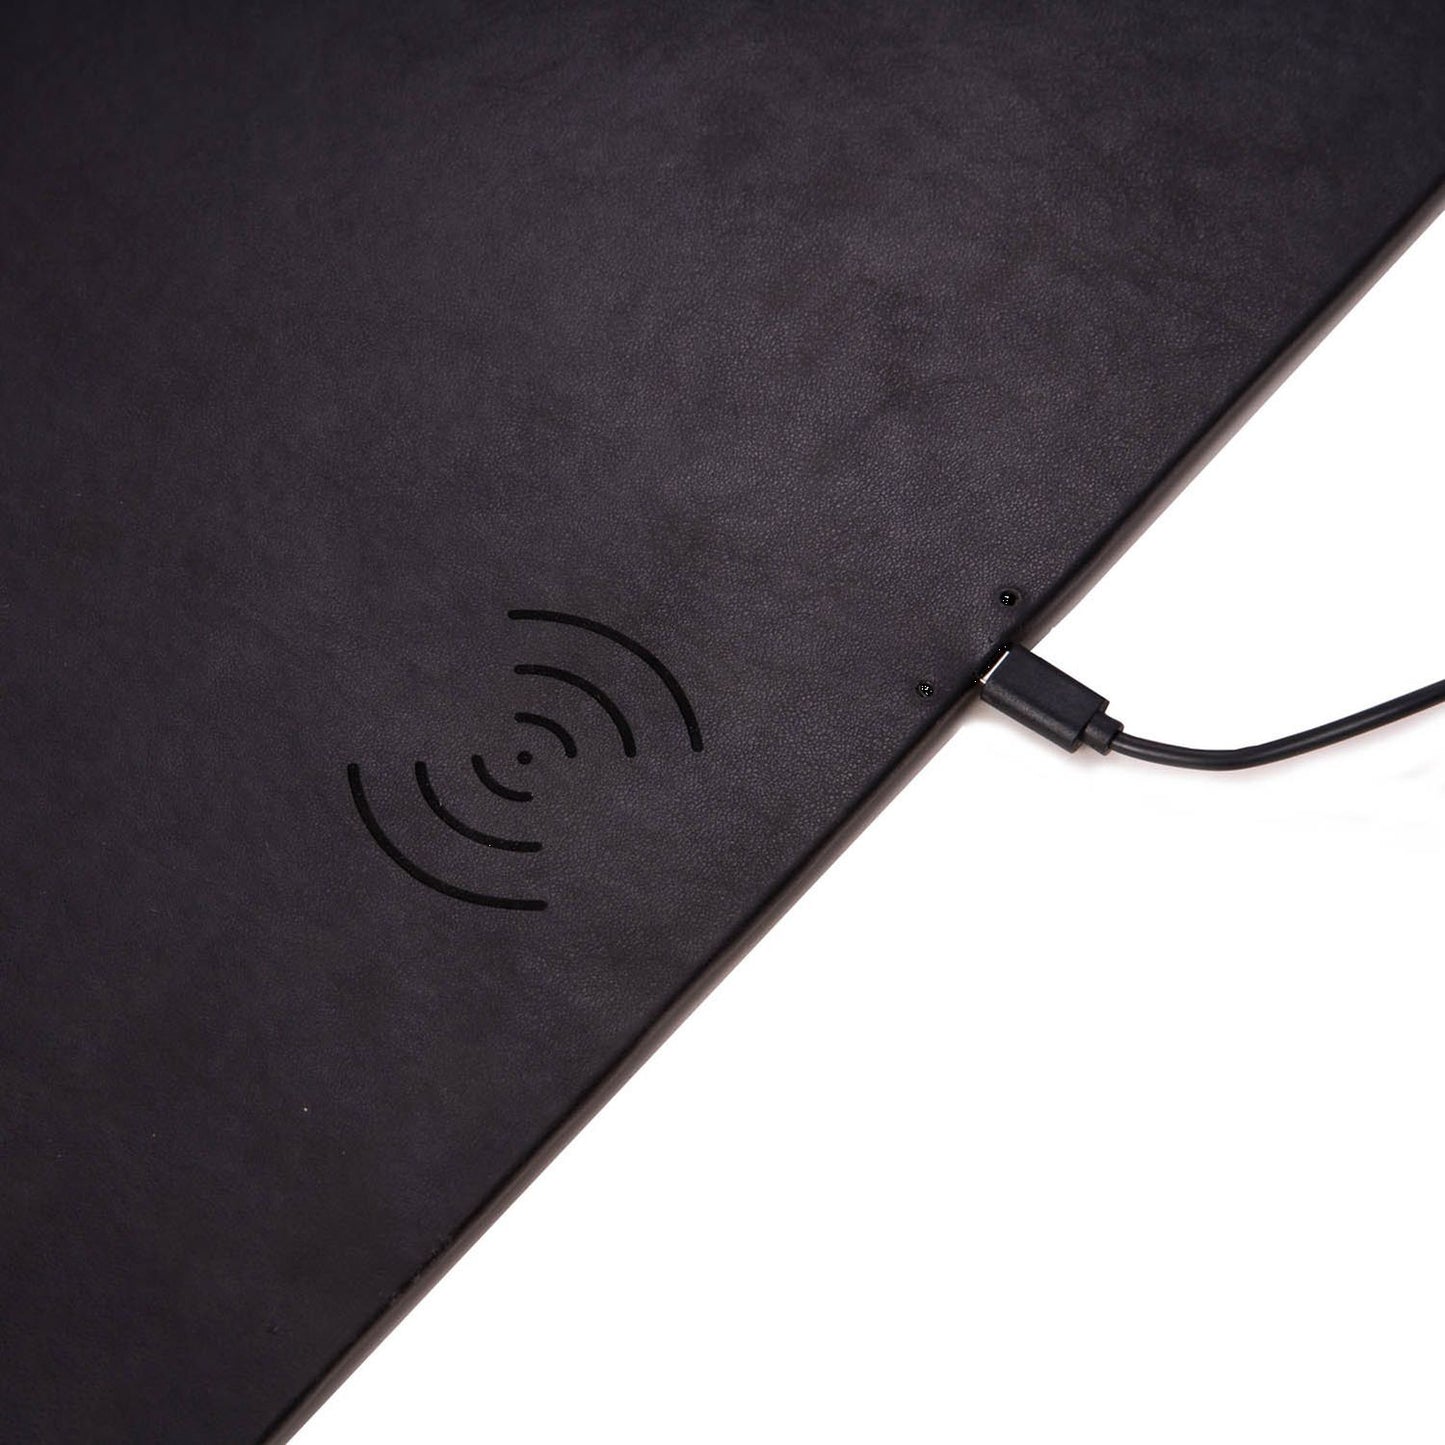 Bey Berk Leather Desk Blotter With Built In Wireless Charging Technology